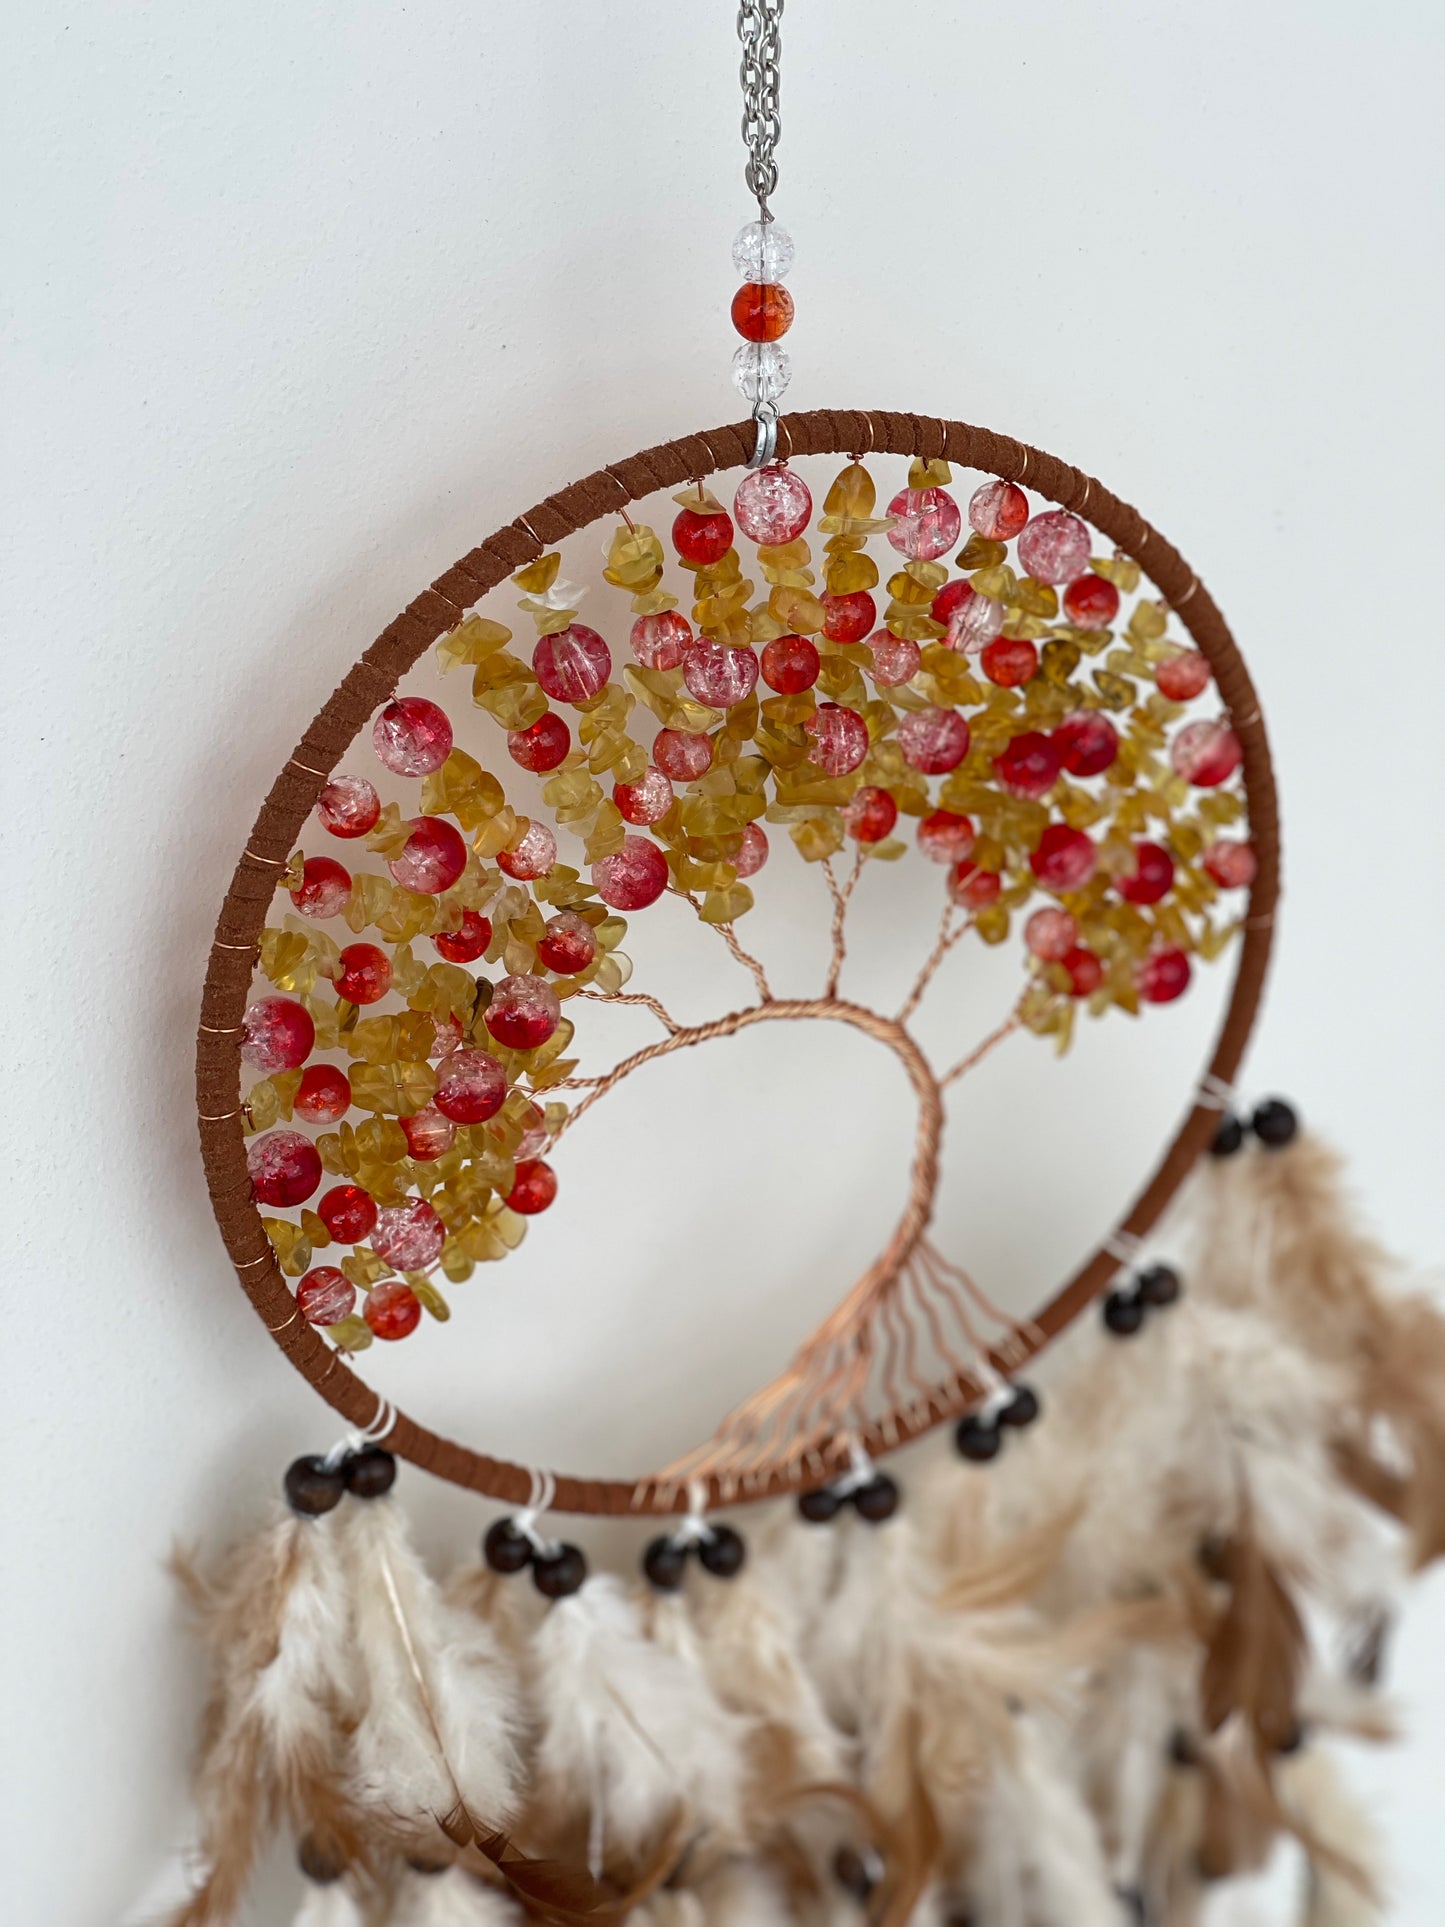 Citrine chips brown and white dreamcatchers